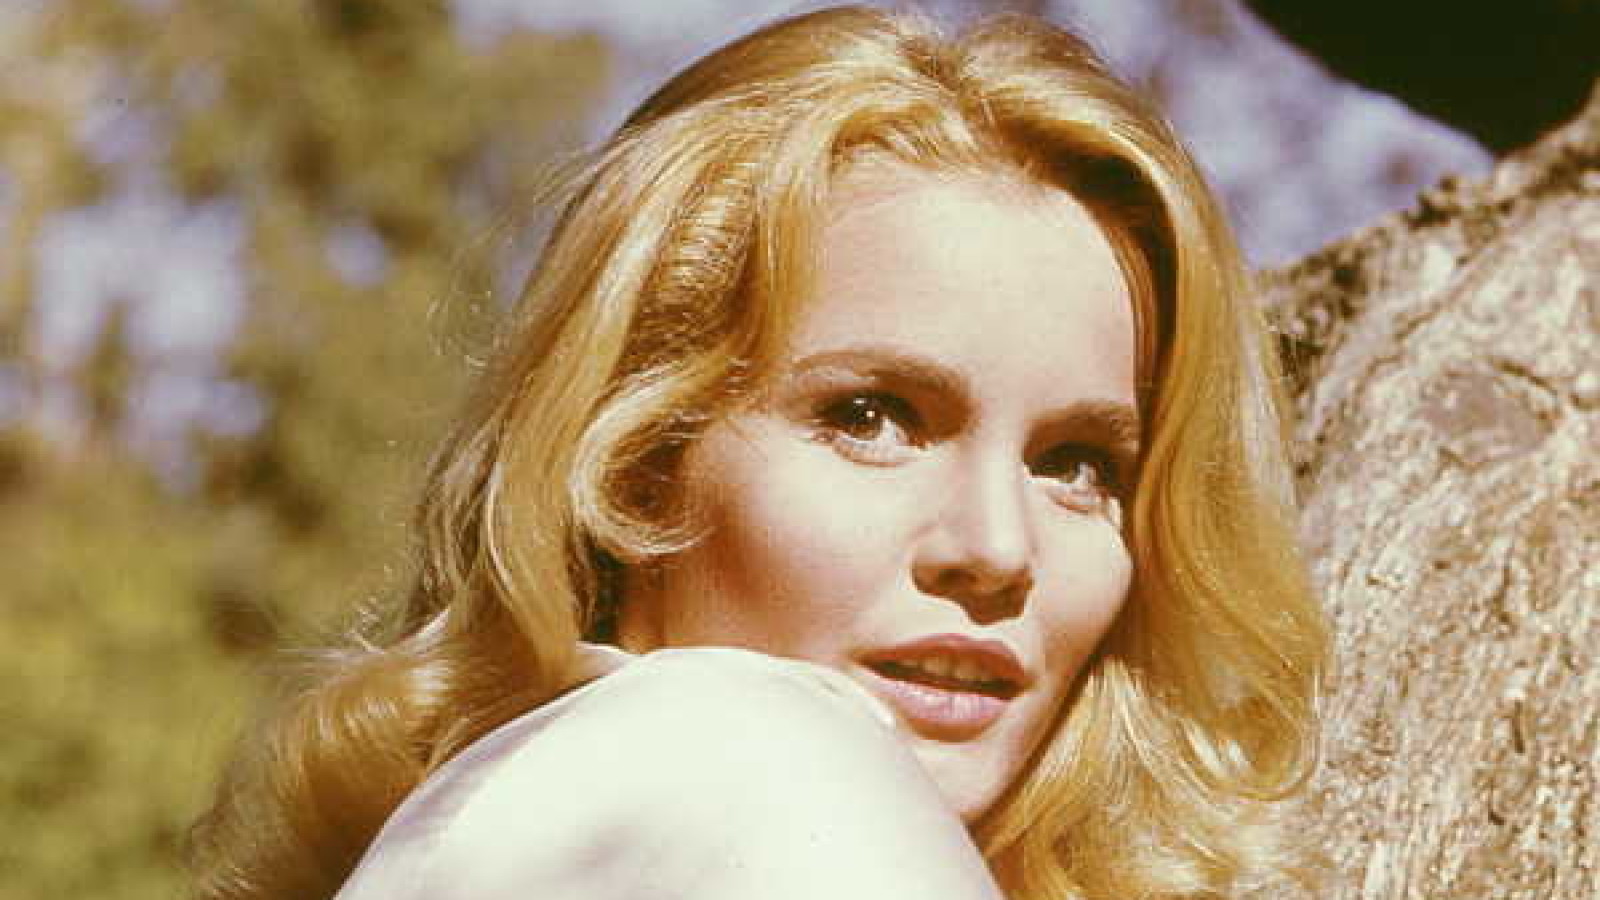 Picture of Tuesday Weld, Picture Of Celebrities